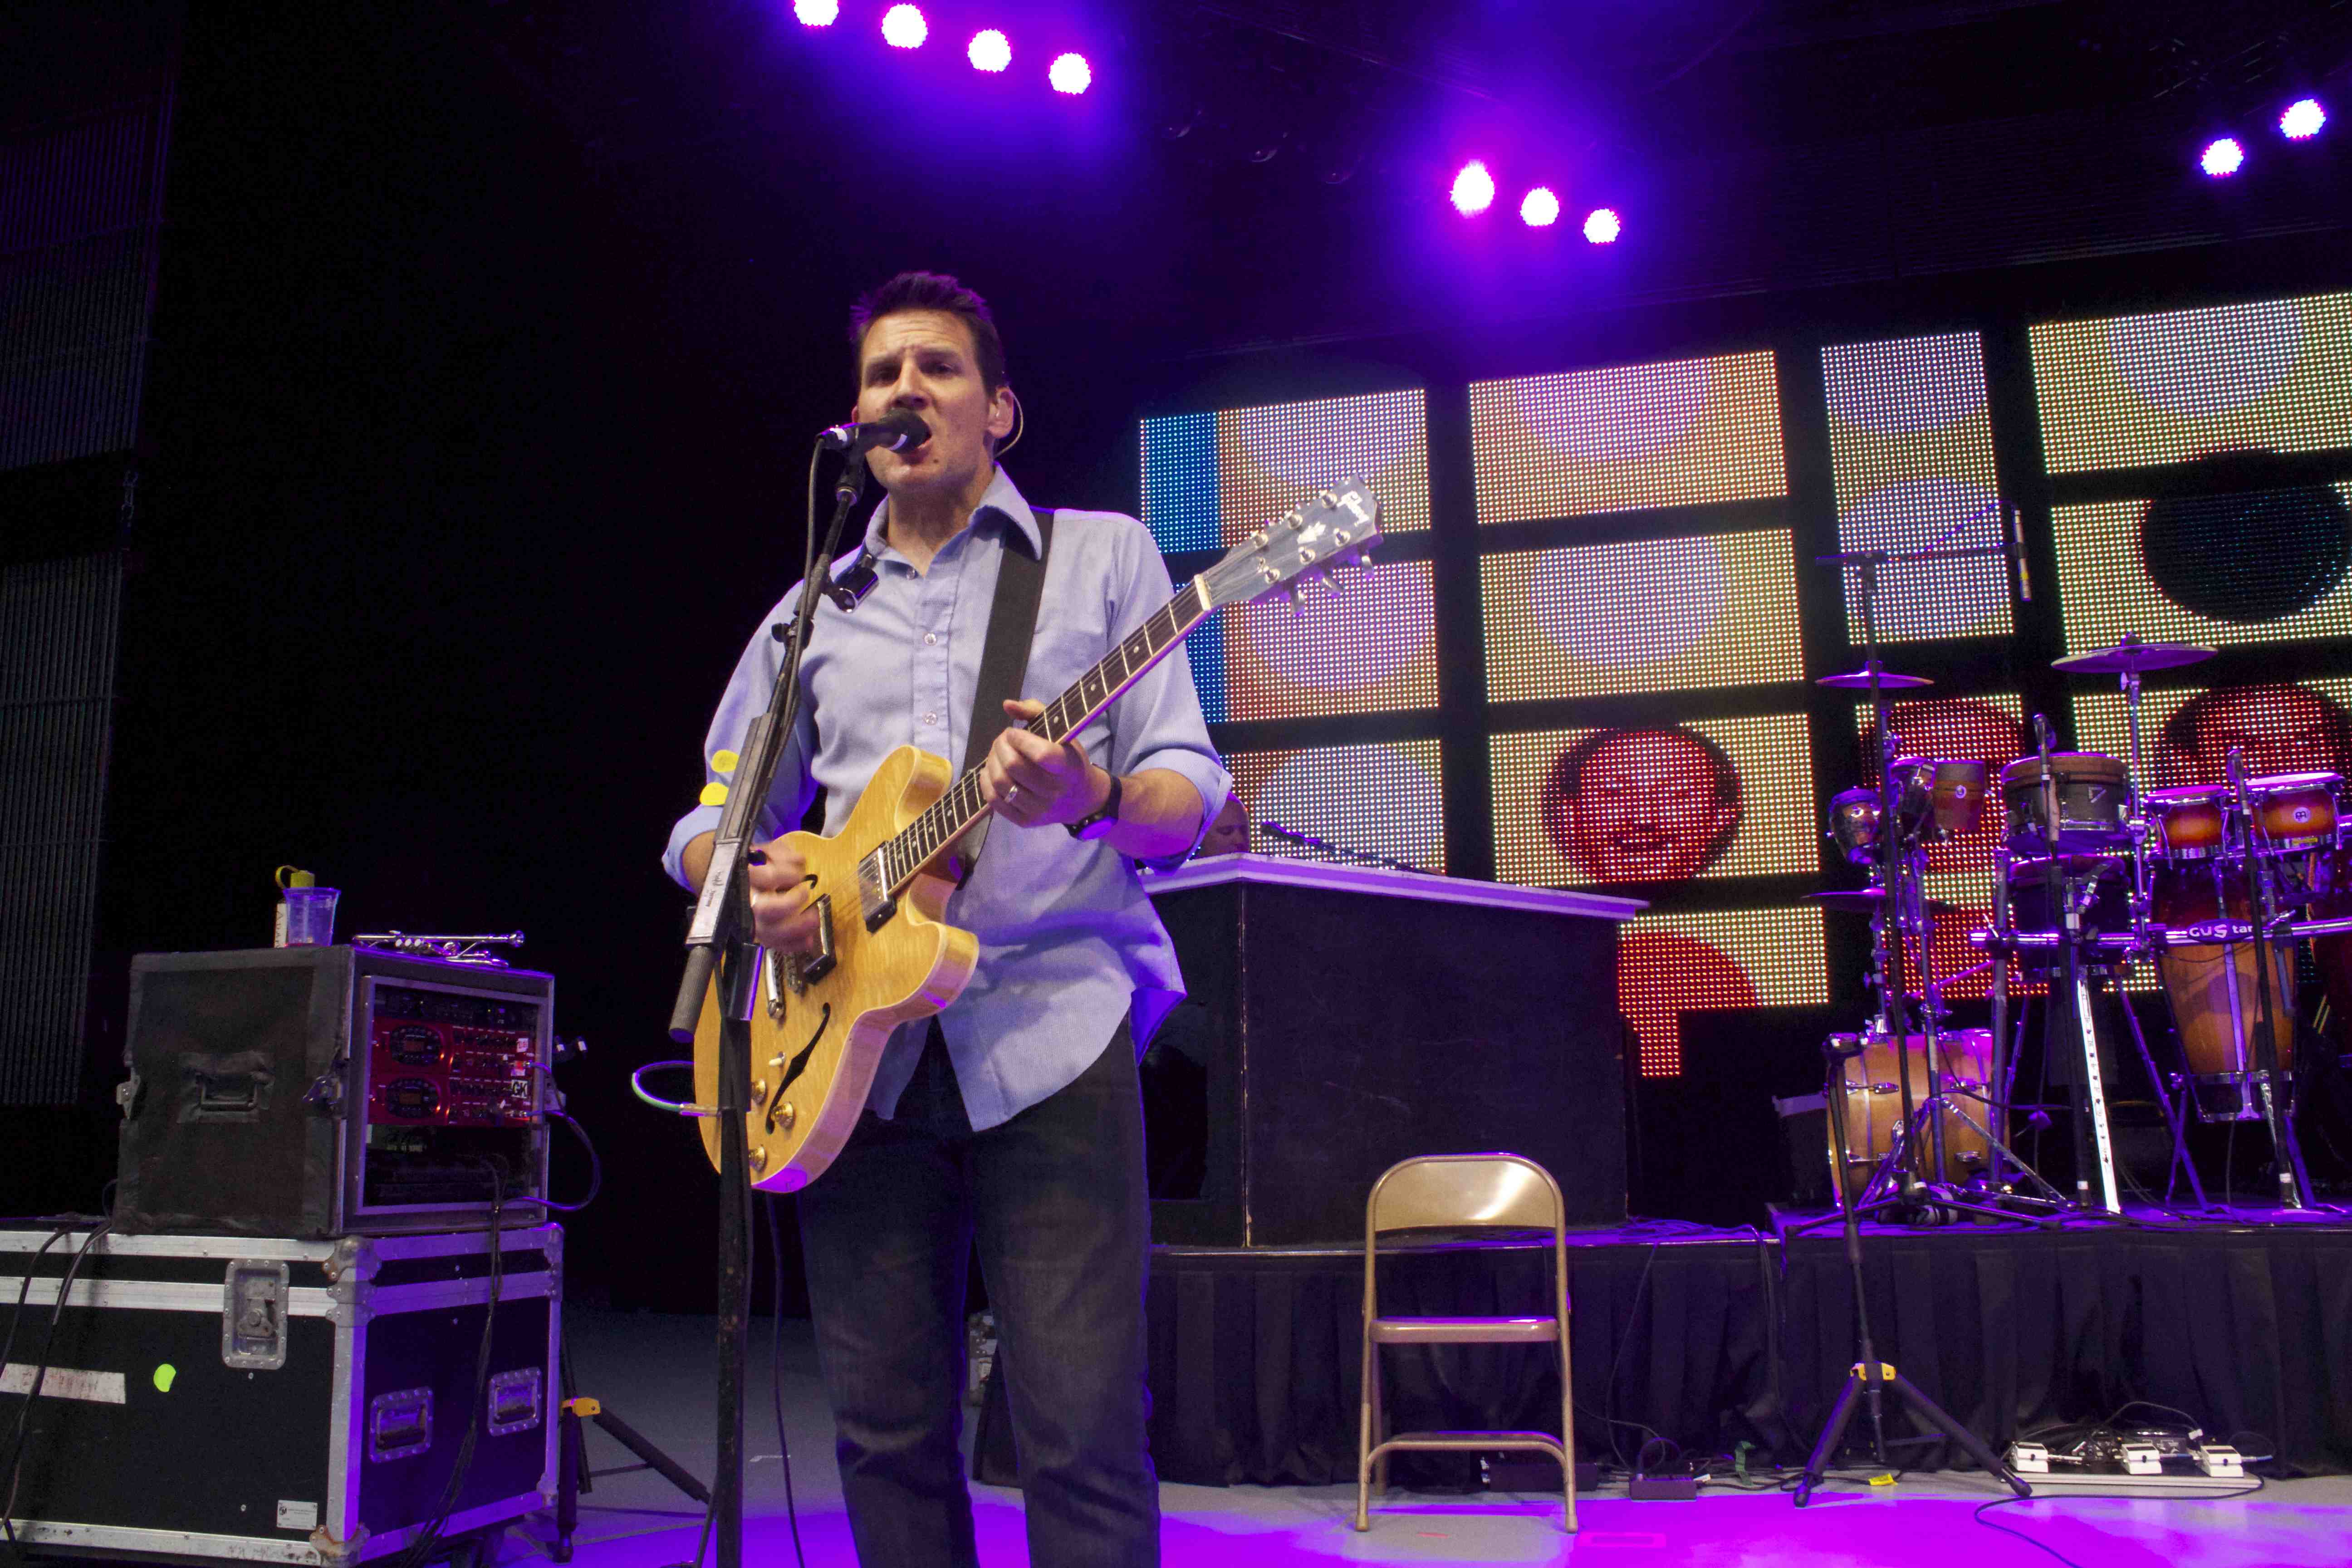 DISPATCH Announces Only The Wild Ones Weekend Concert Vacation in Mexico Featuring Guster, G. Love, Amythyst and More